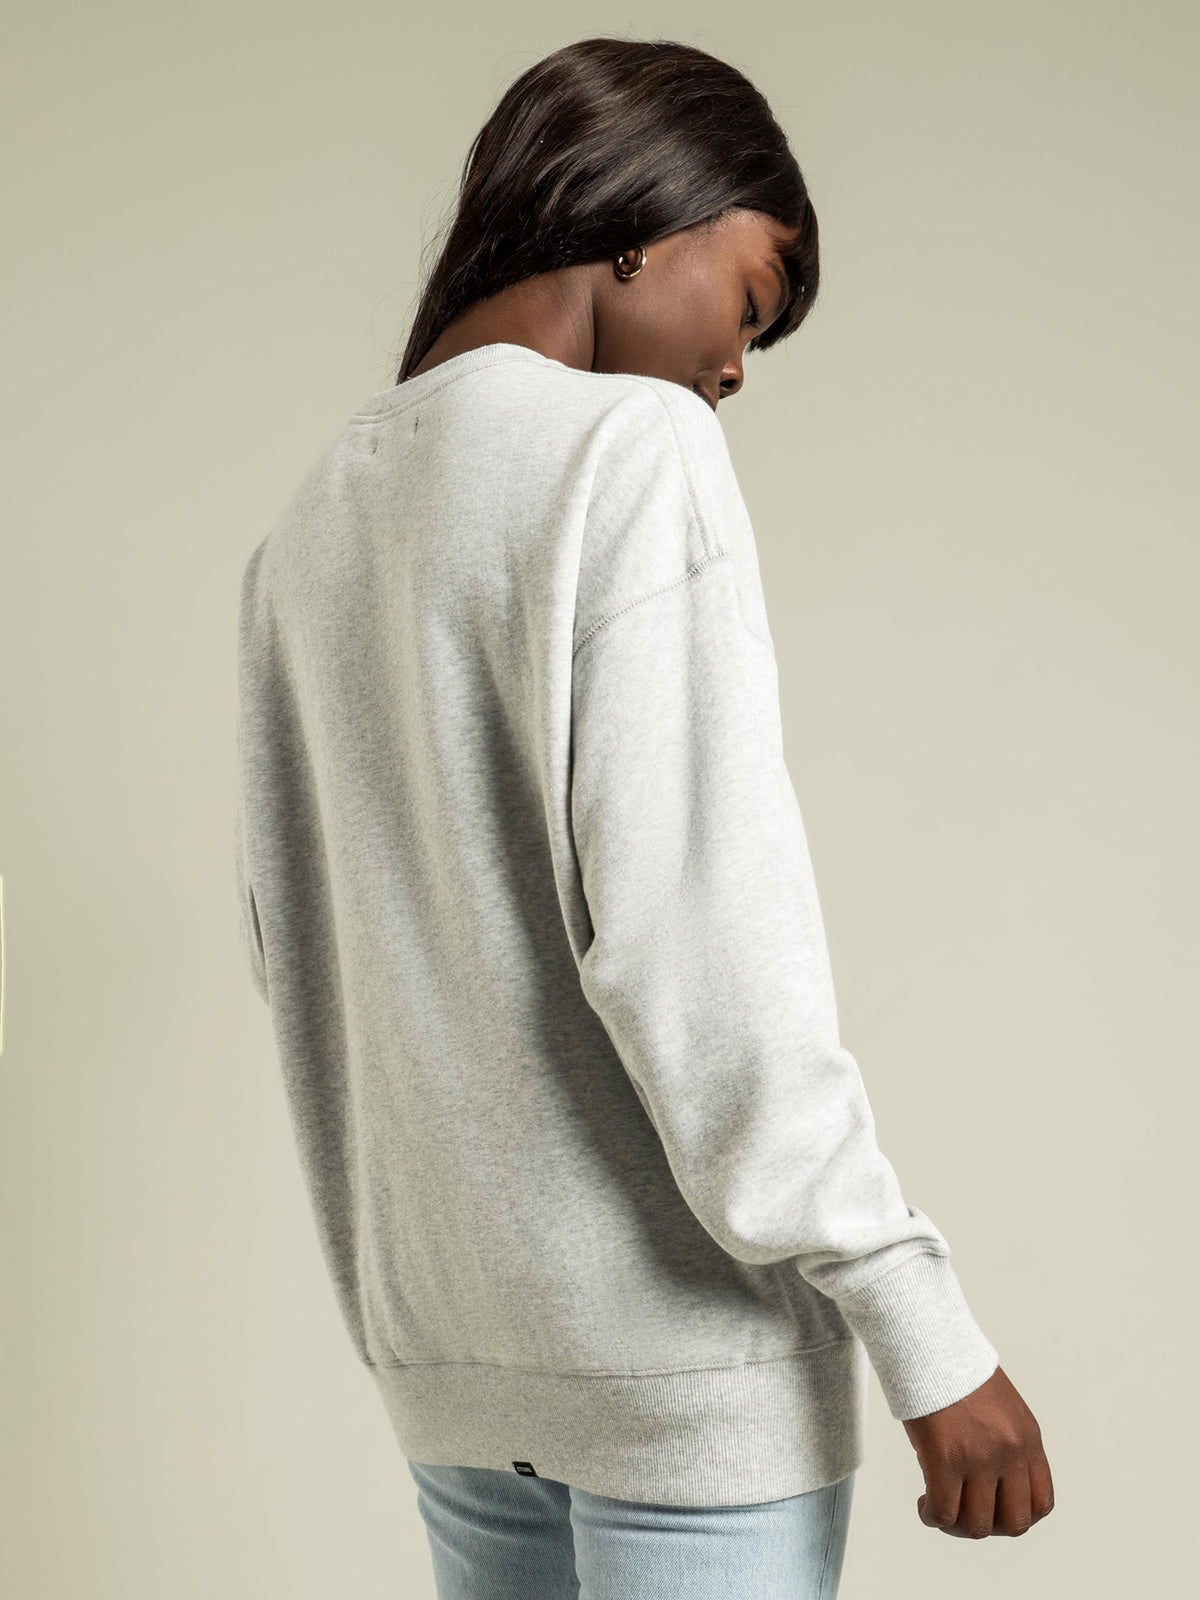 Diversion Slouch Crewneck in Snow Marle